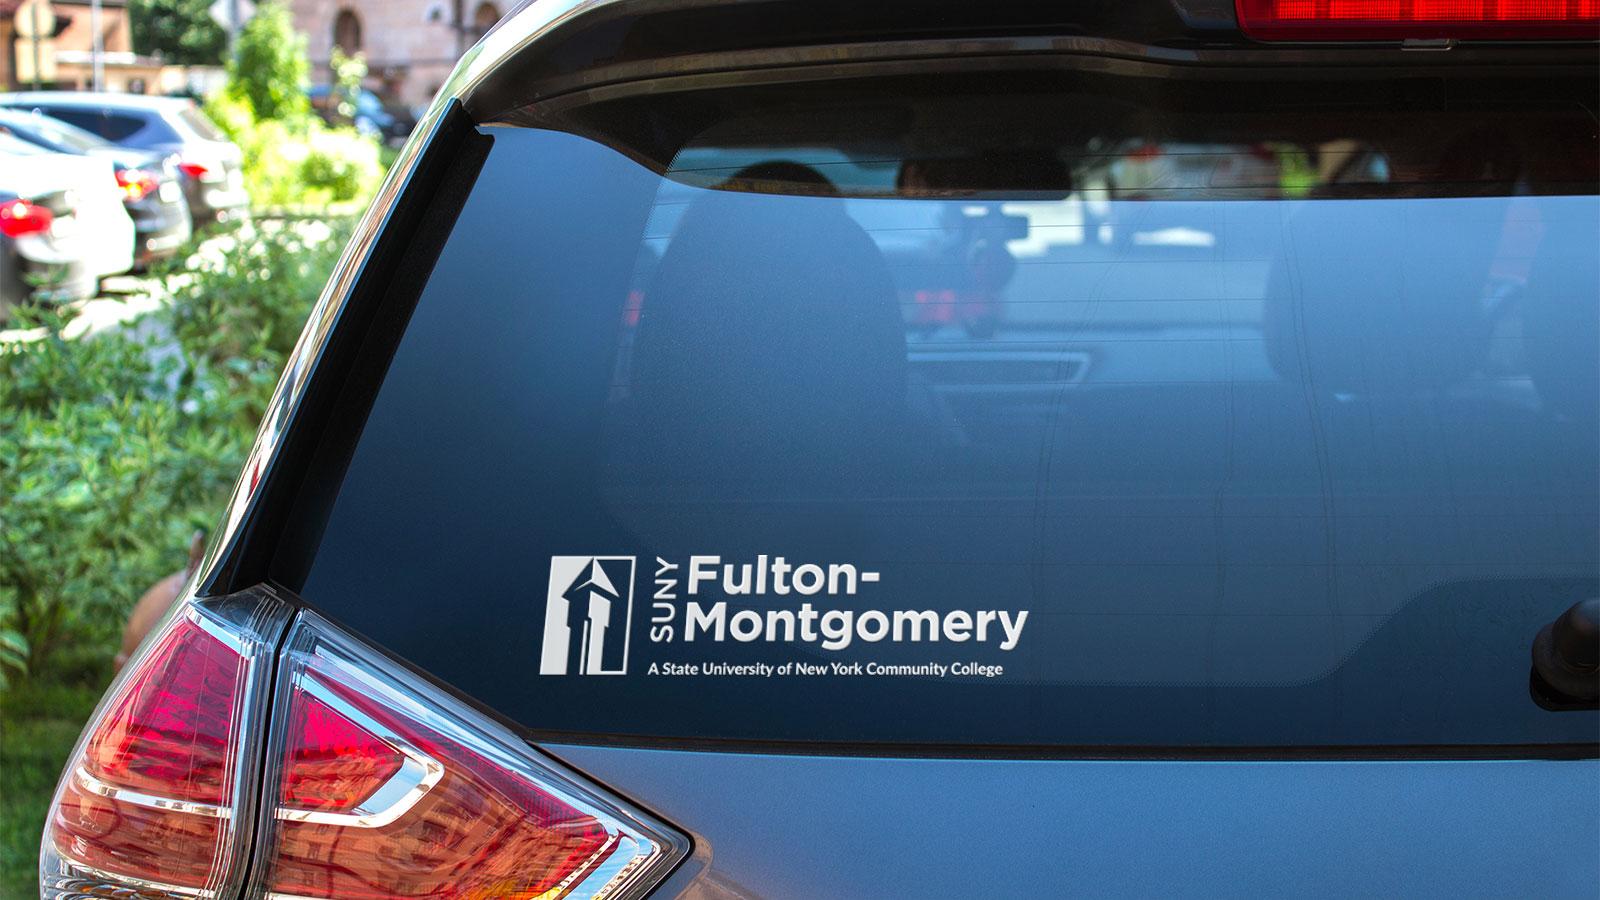 Fulton-Montgomery Community College | One color window decal